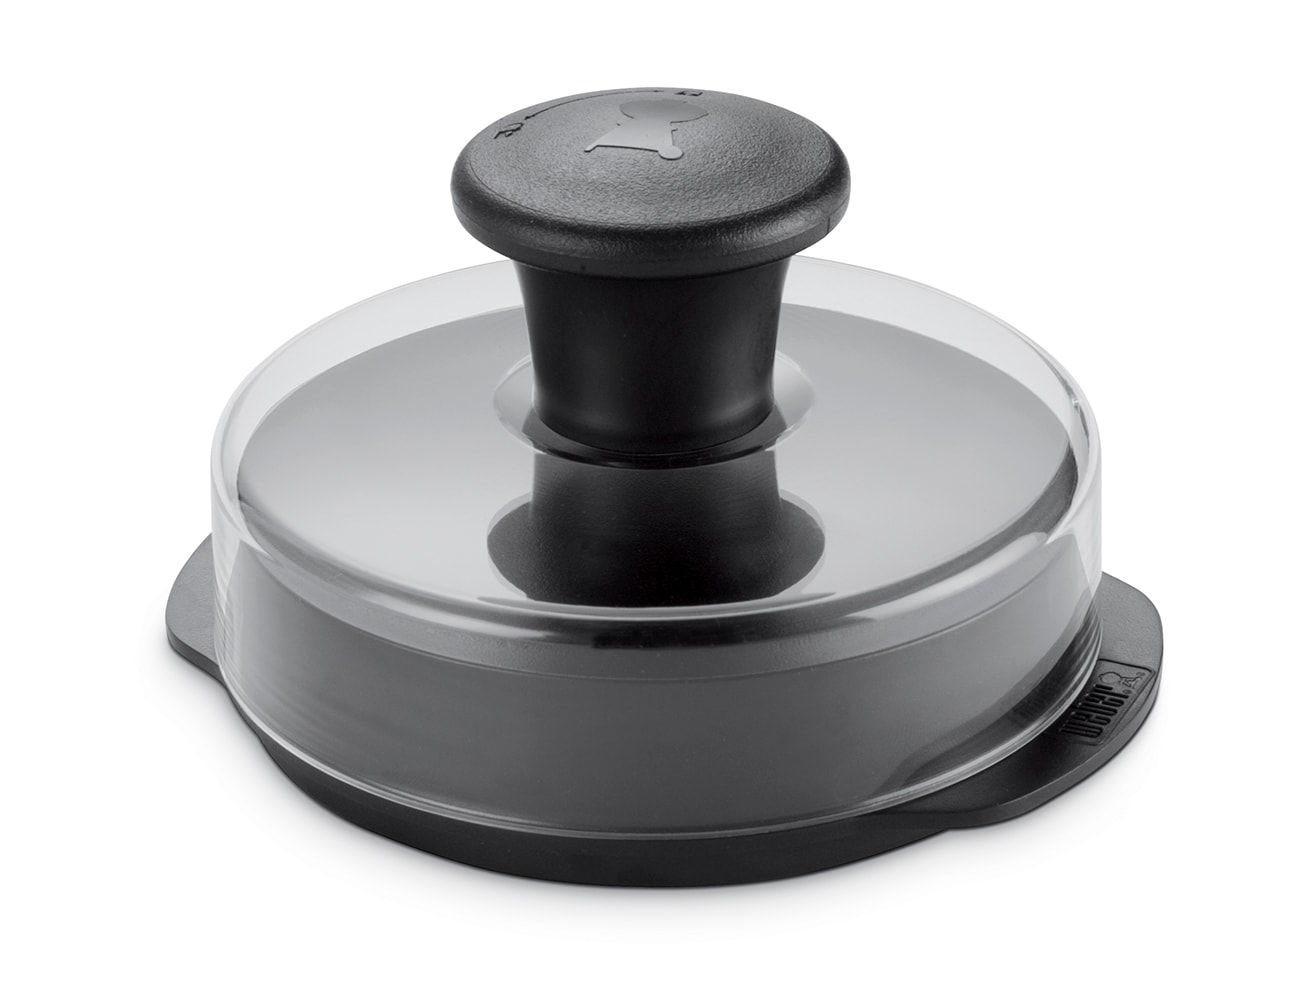 From the Kitchen Essential #1: A Cast-Iron Burger Press